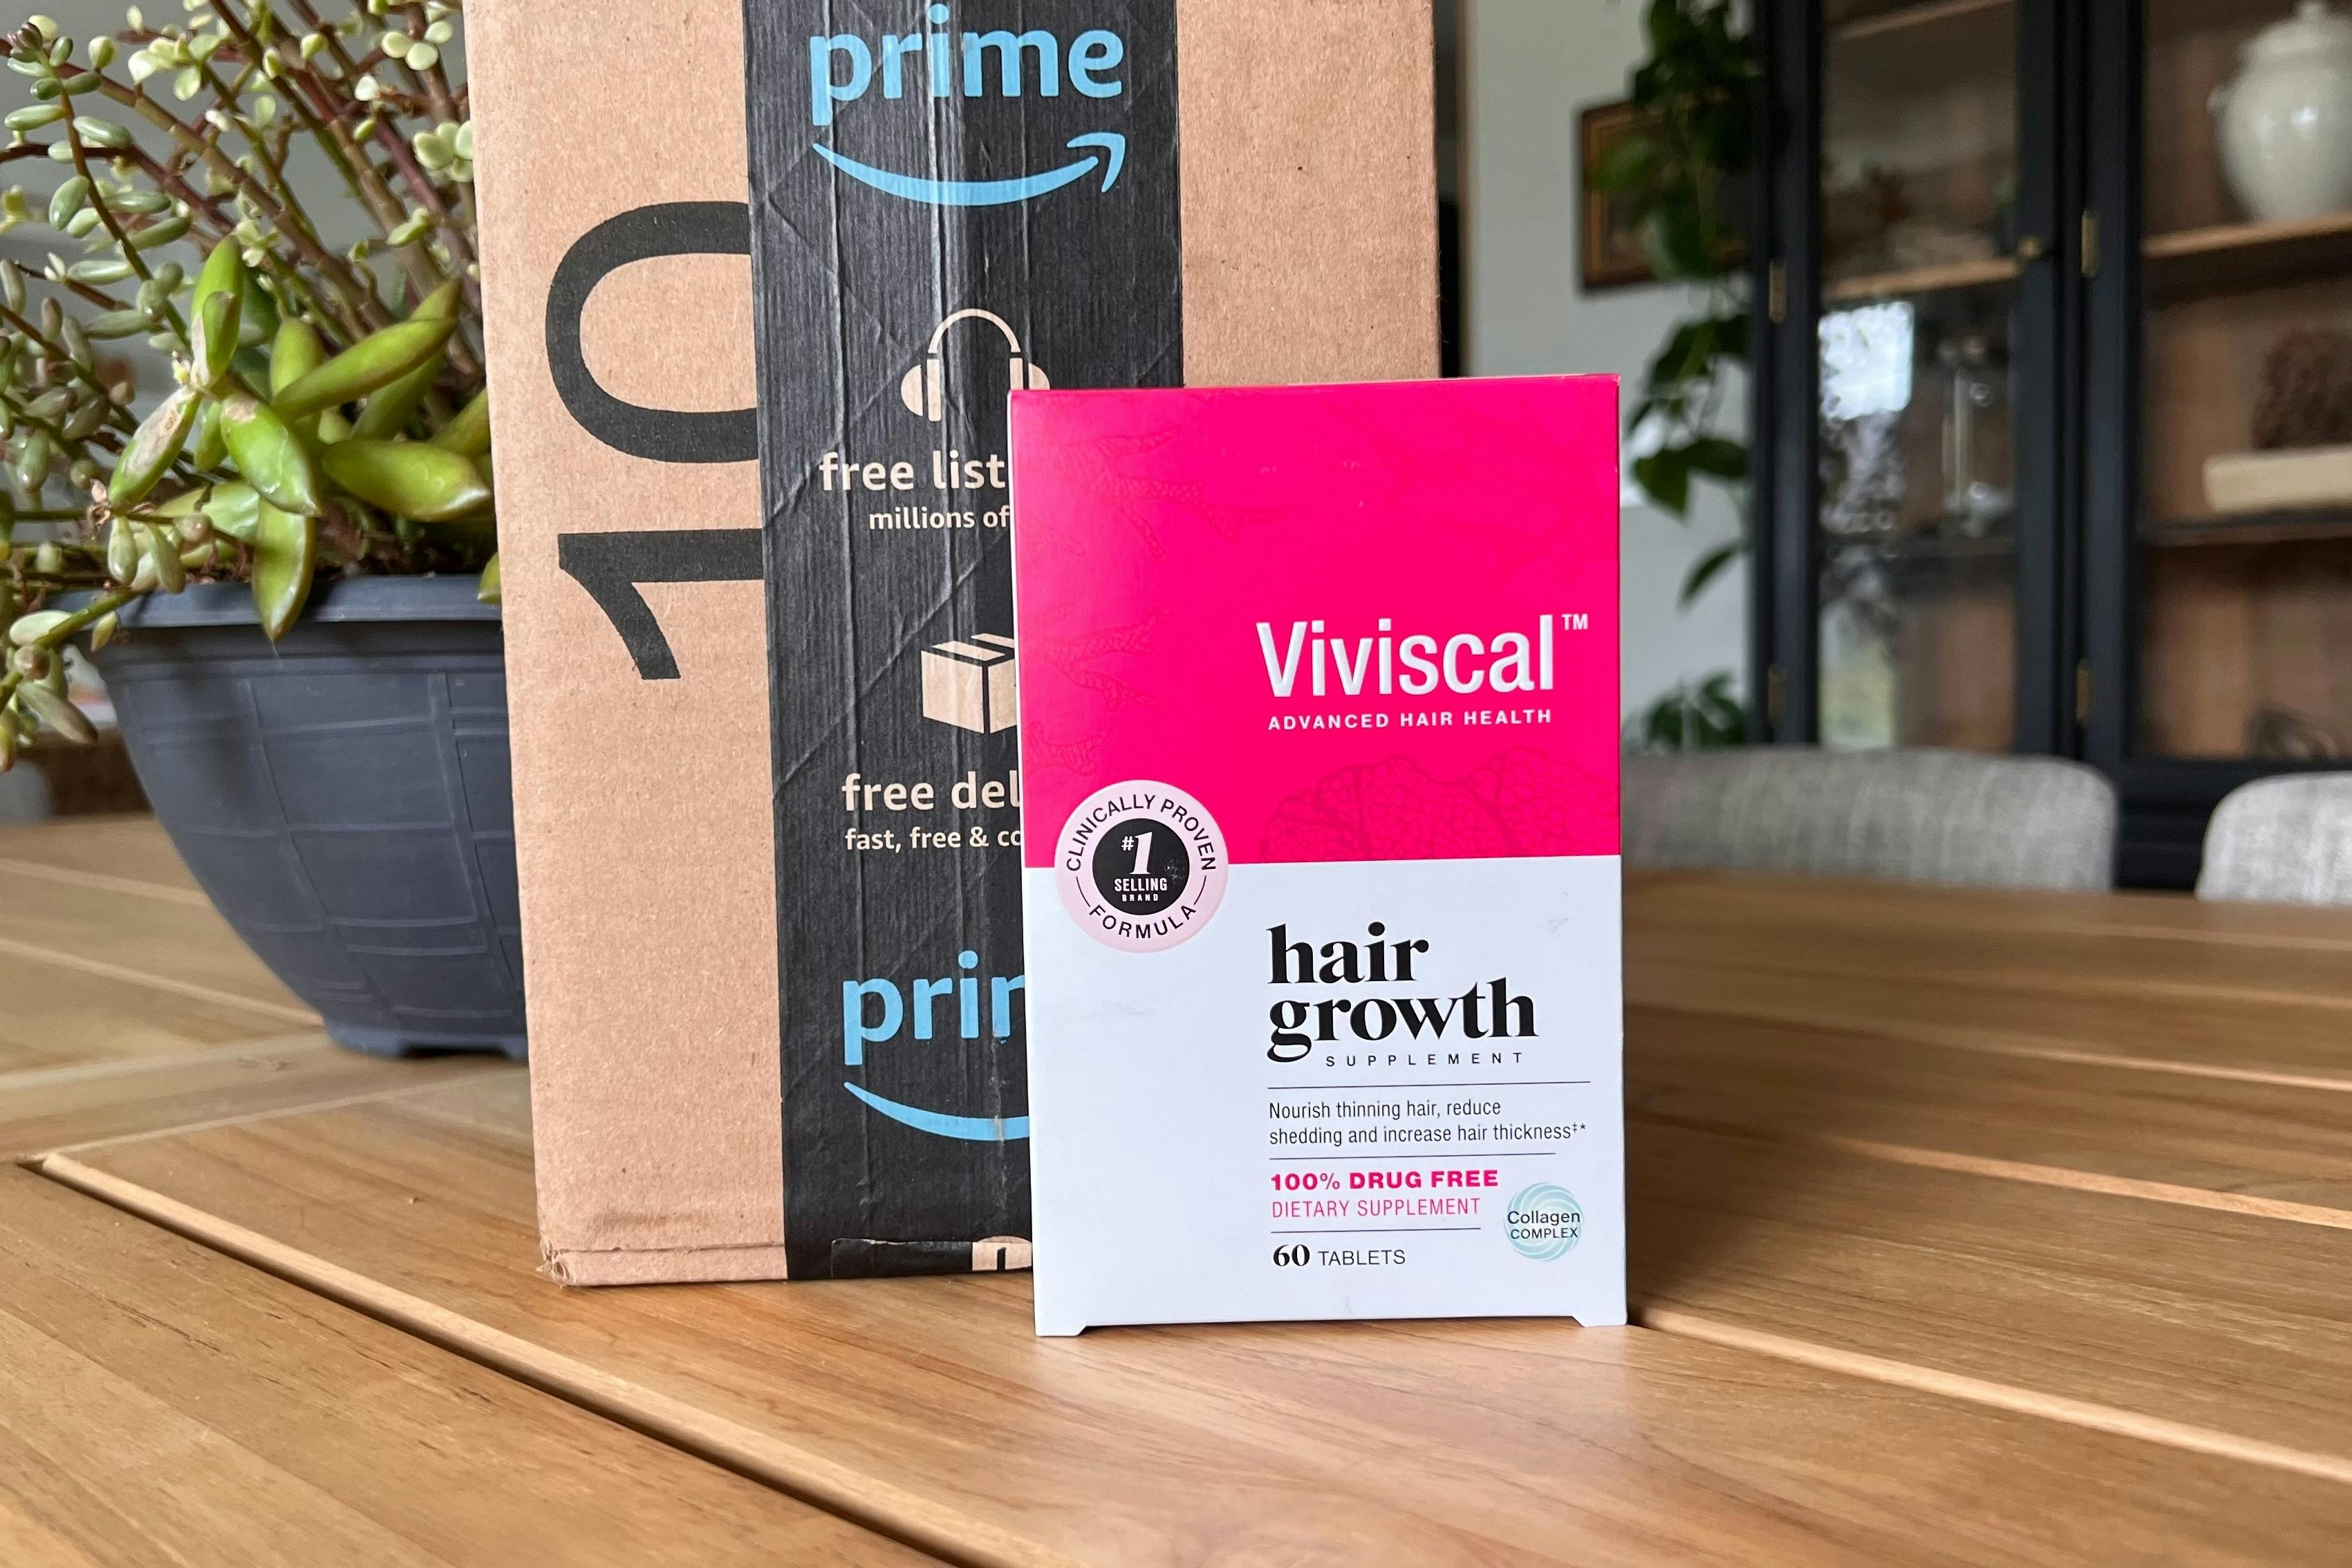 Viviscal Hair Growth Supplements: 3-Month Supply for $62.23 on